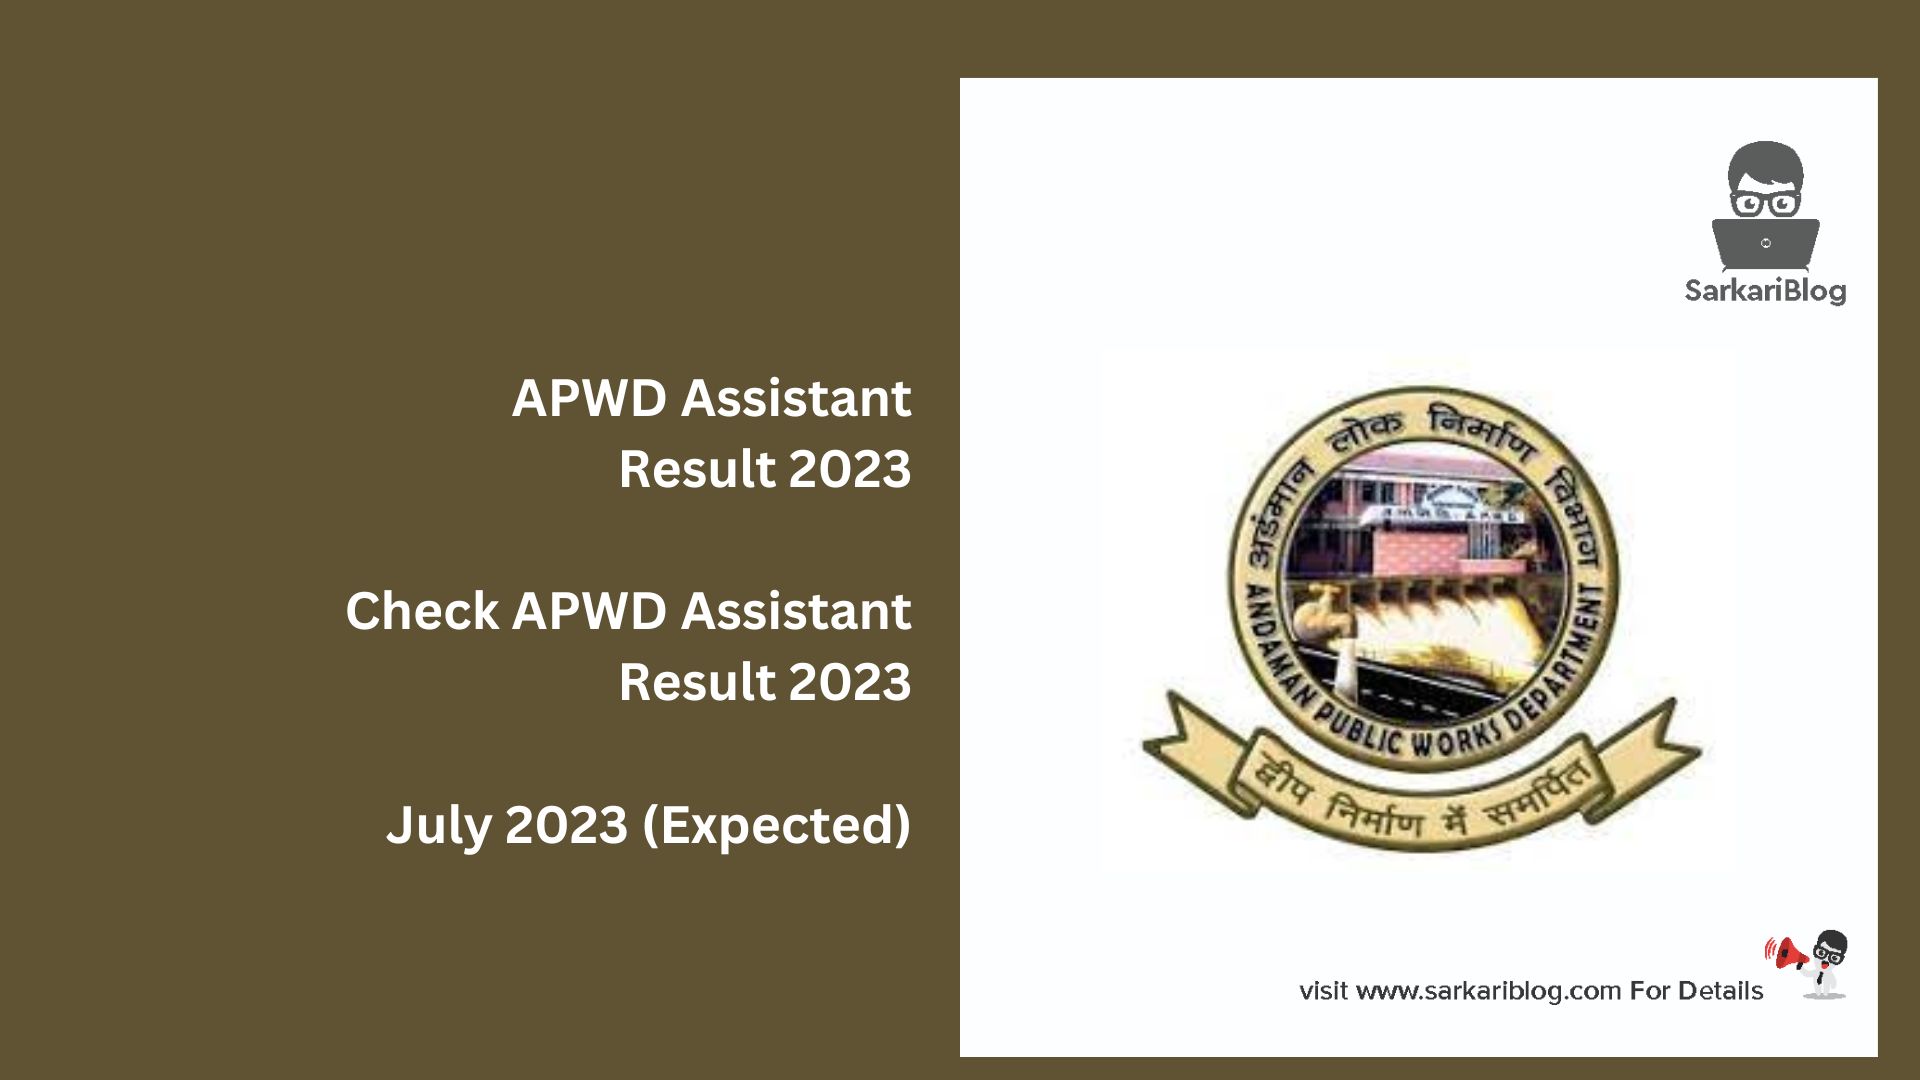 APWD Assistant Result 2023